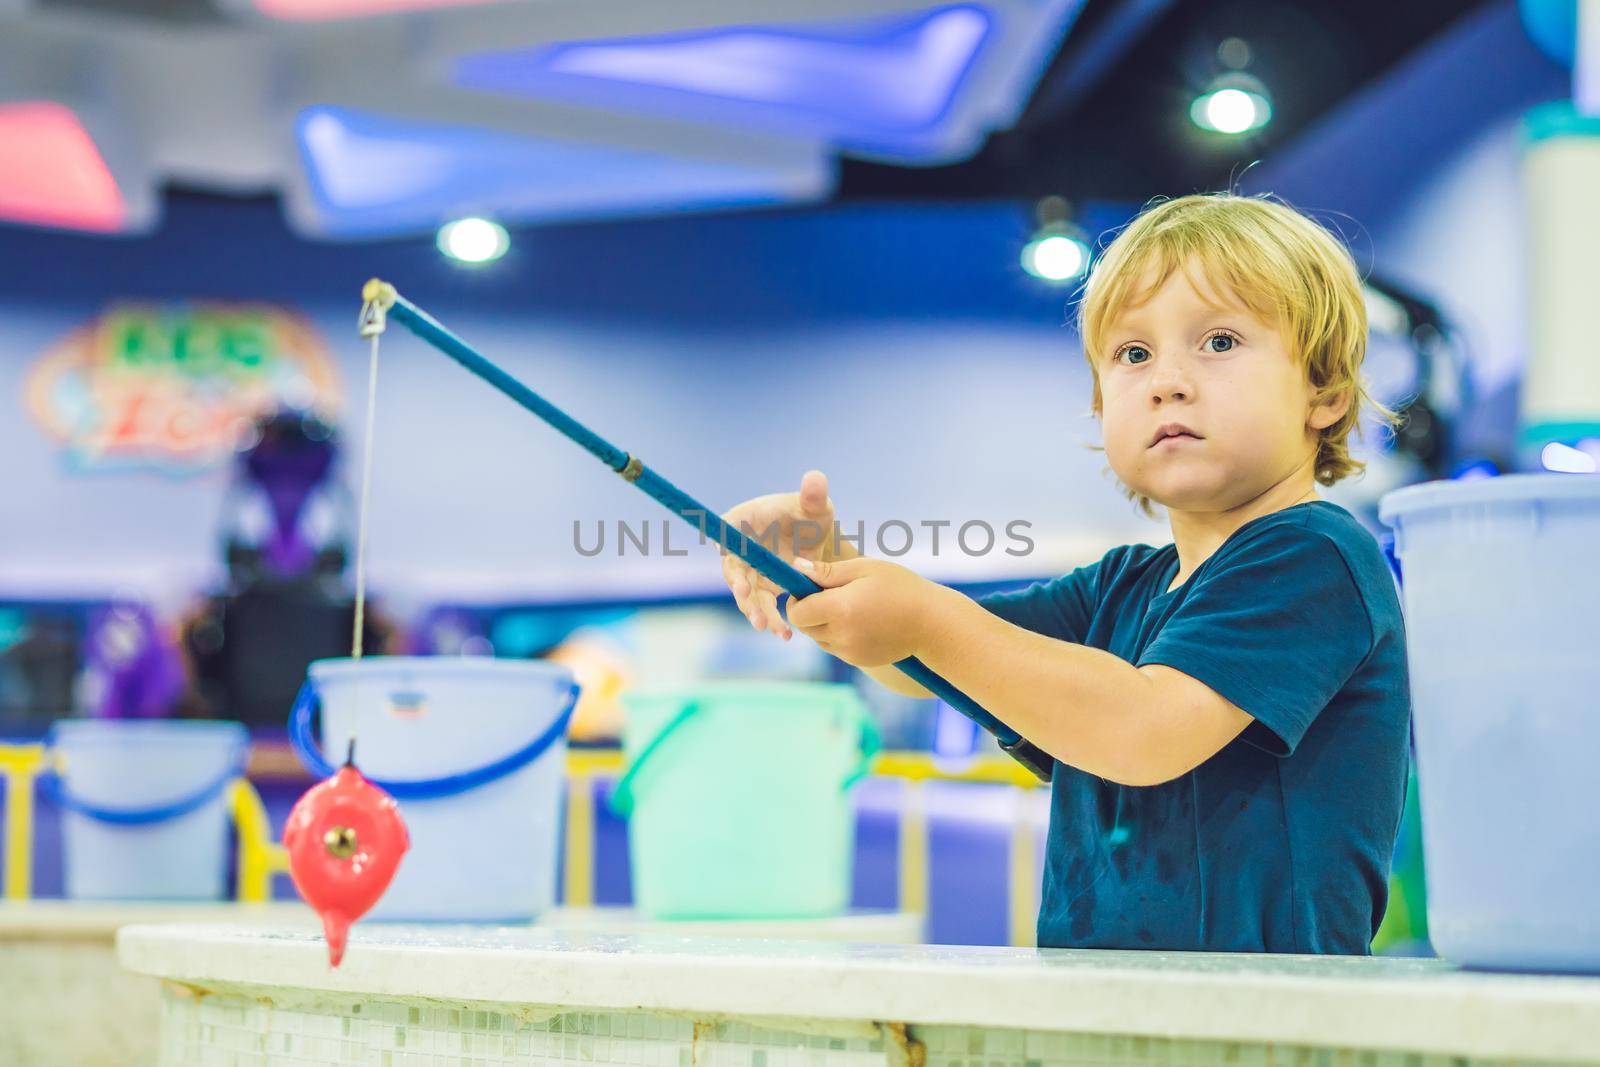 Cute boy in the playroom fishing. The development of fine motor concept. Creativity Game concept by galitskaya